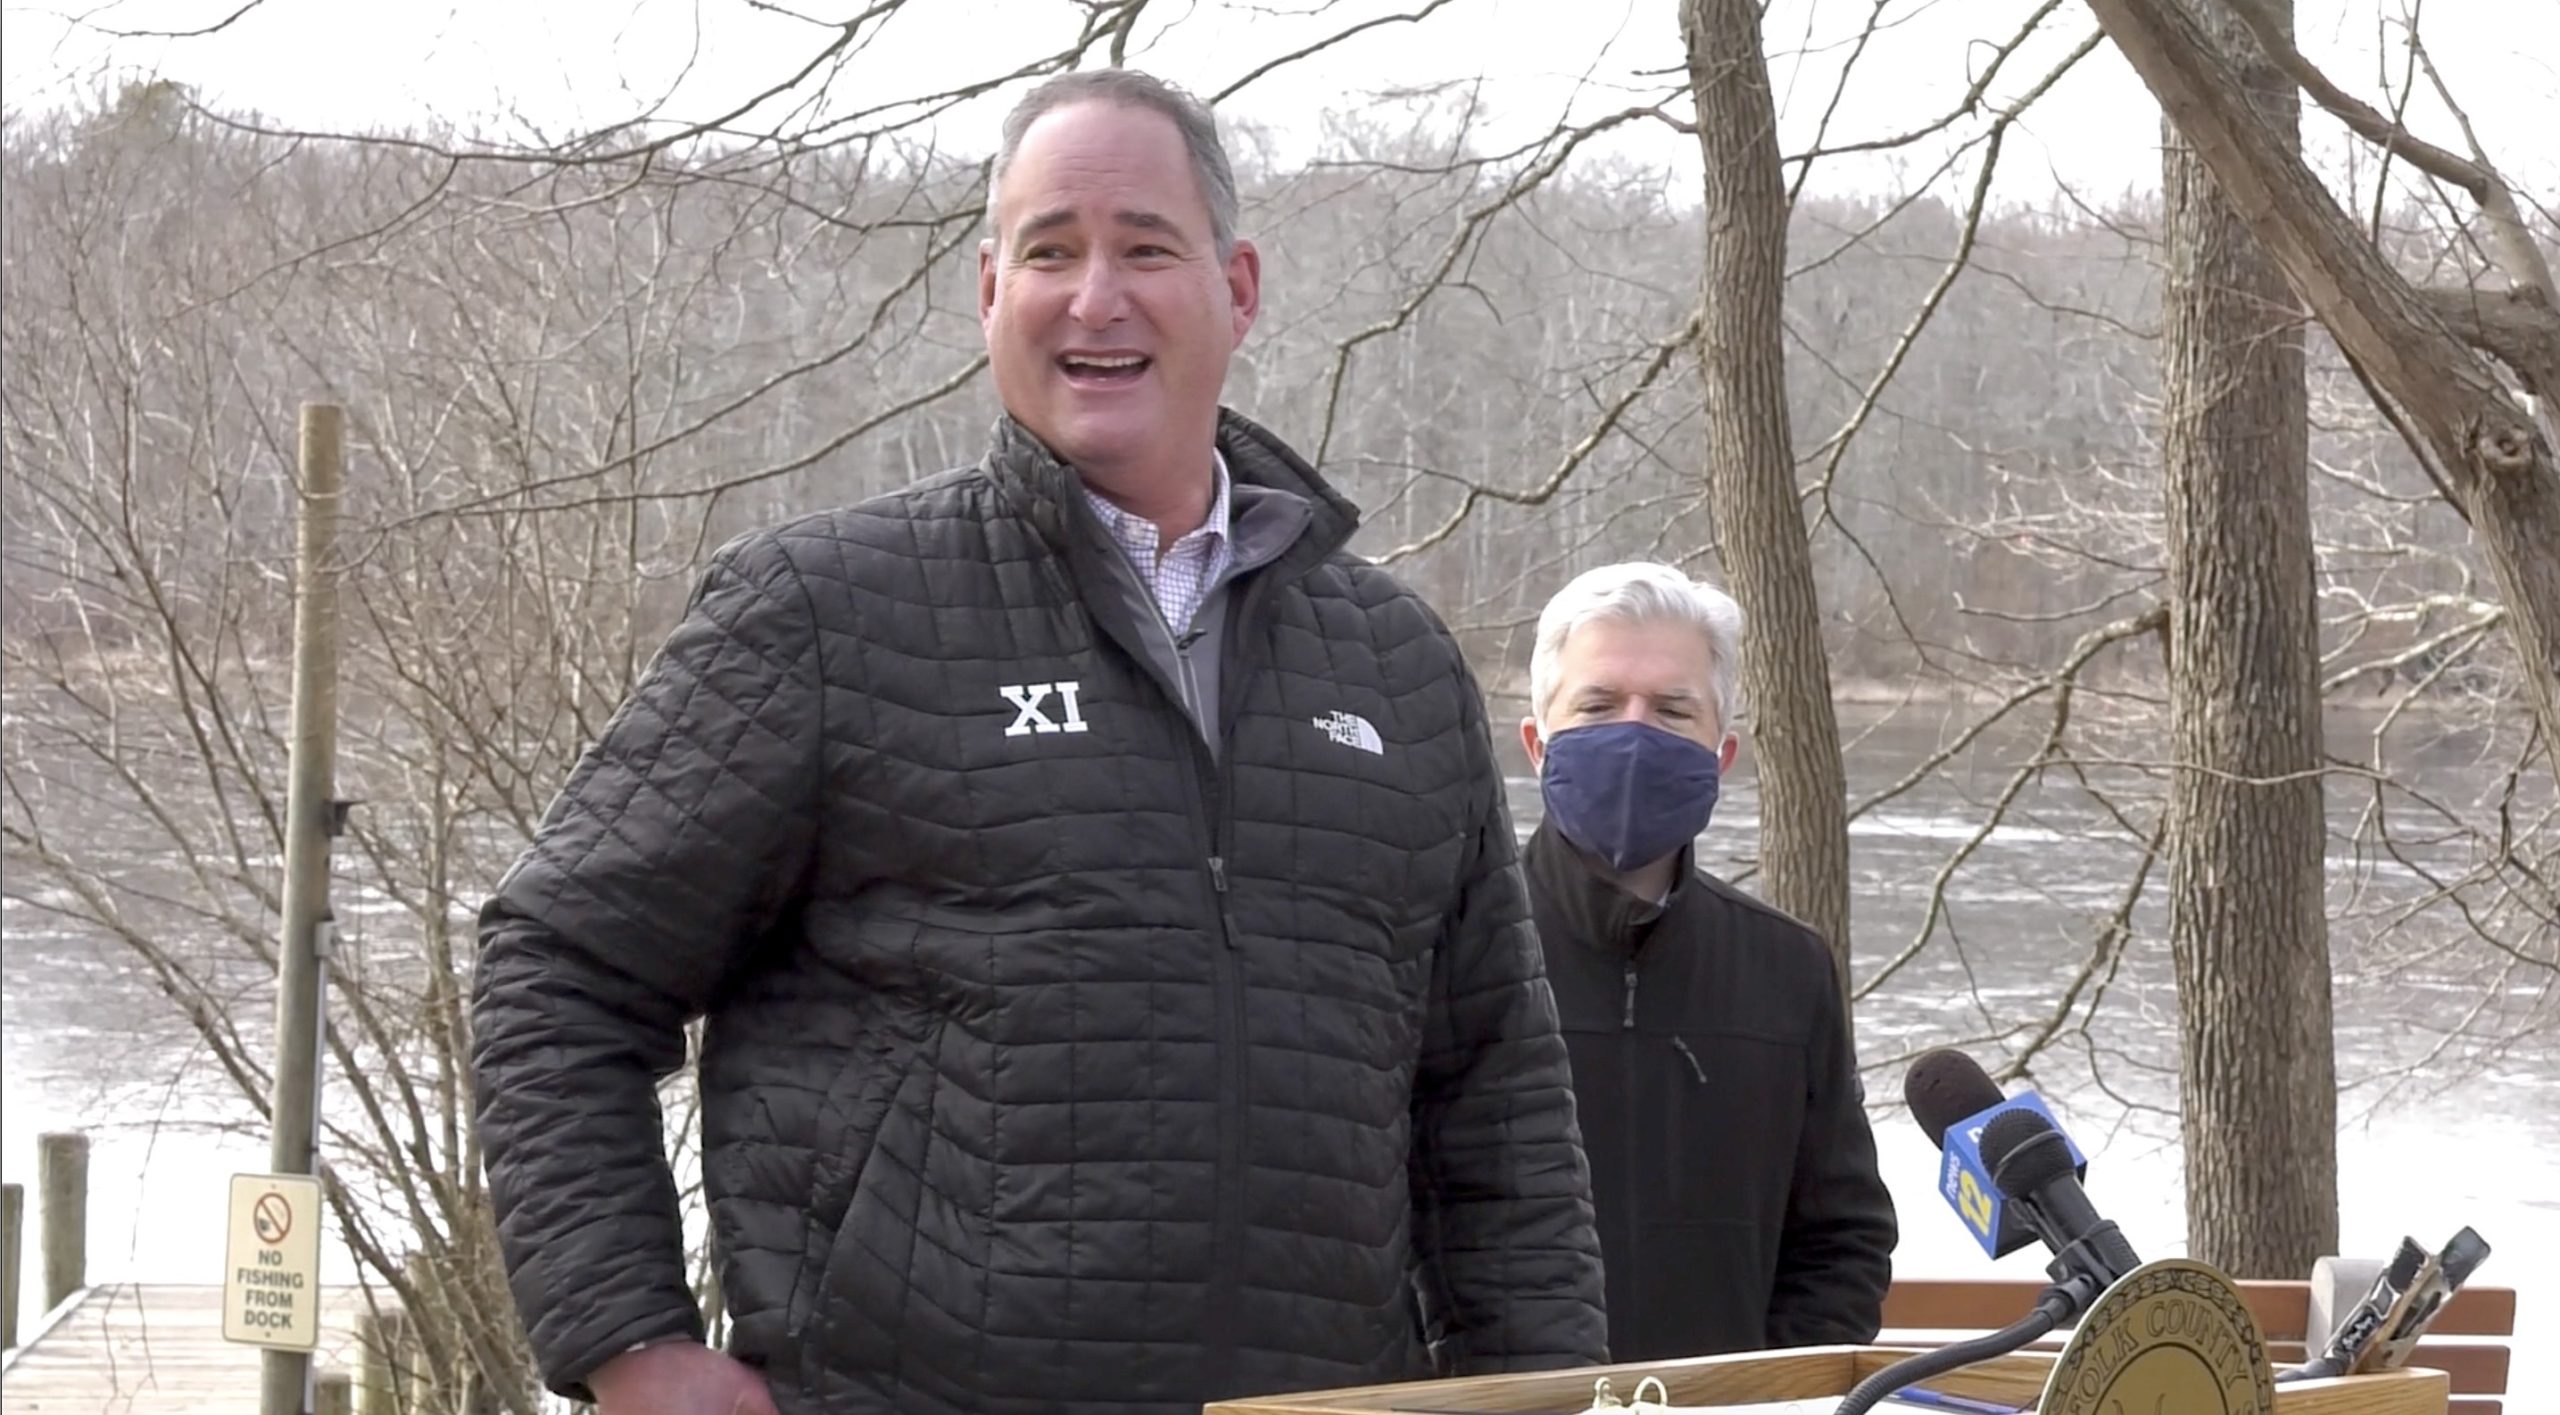 Section XI Executive Director Tom Combs discusses how happy he is to see student-athletes in school districts that play sports deemed high-risk by the state being given approval to practice and compete at a press conference at Blydenburgh County Park in Smithtown January 25.